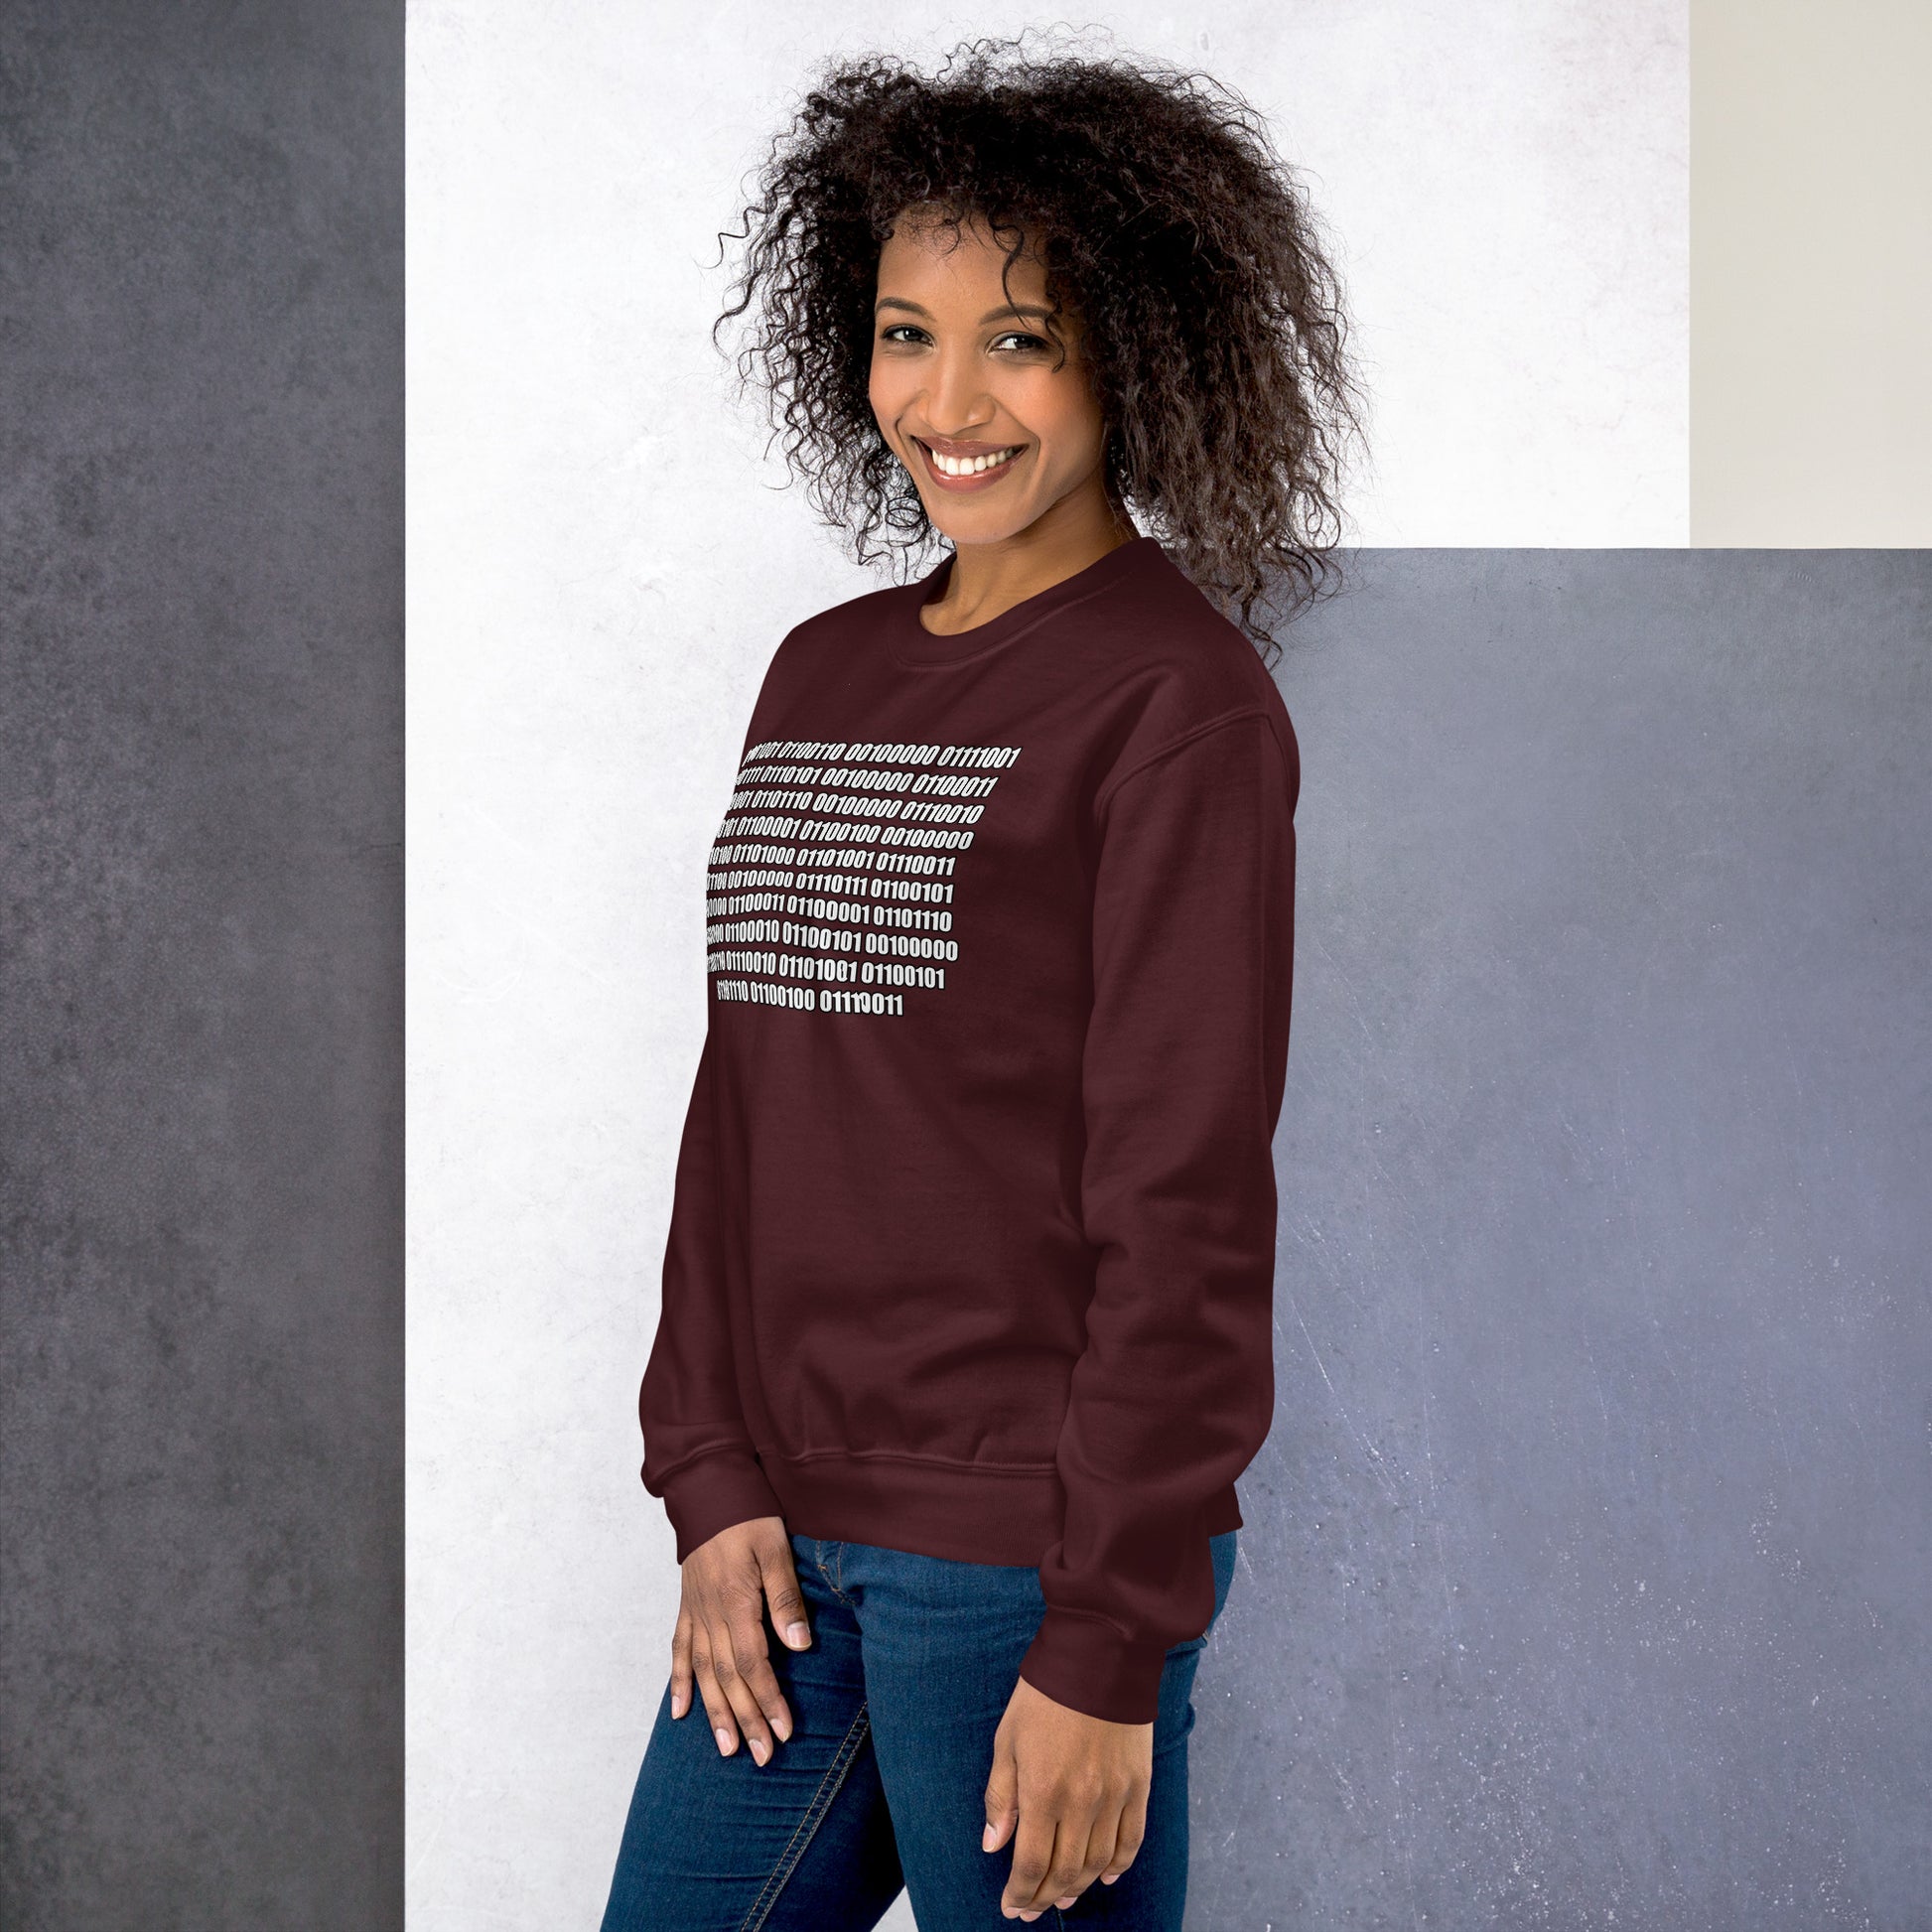 Women with maroon sweatshirt with binaire text "If you can read this"